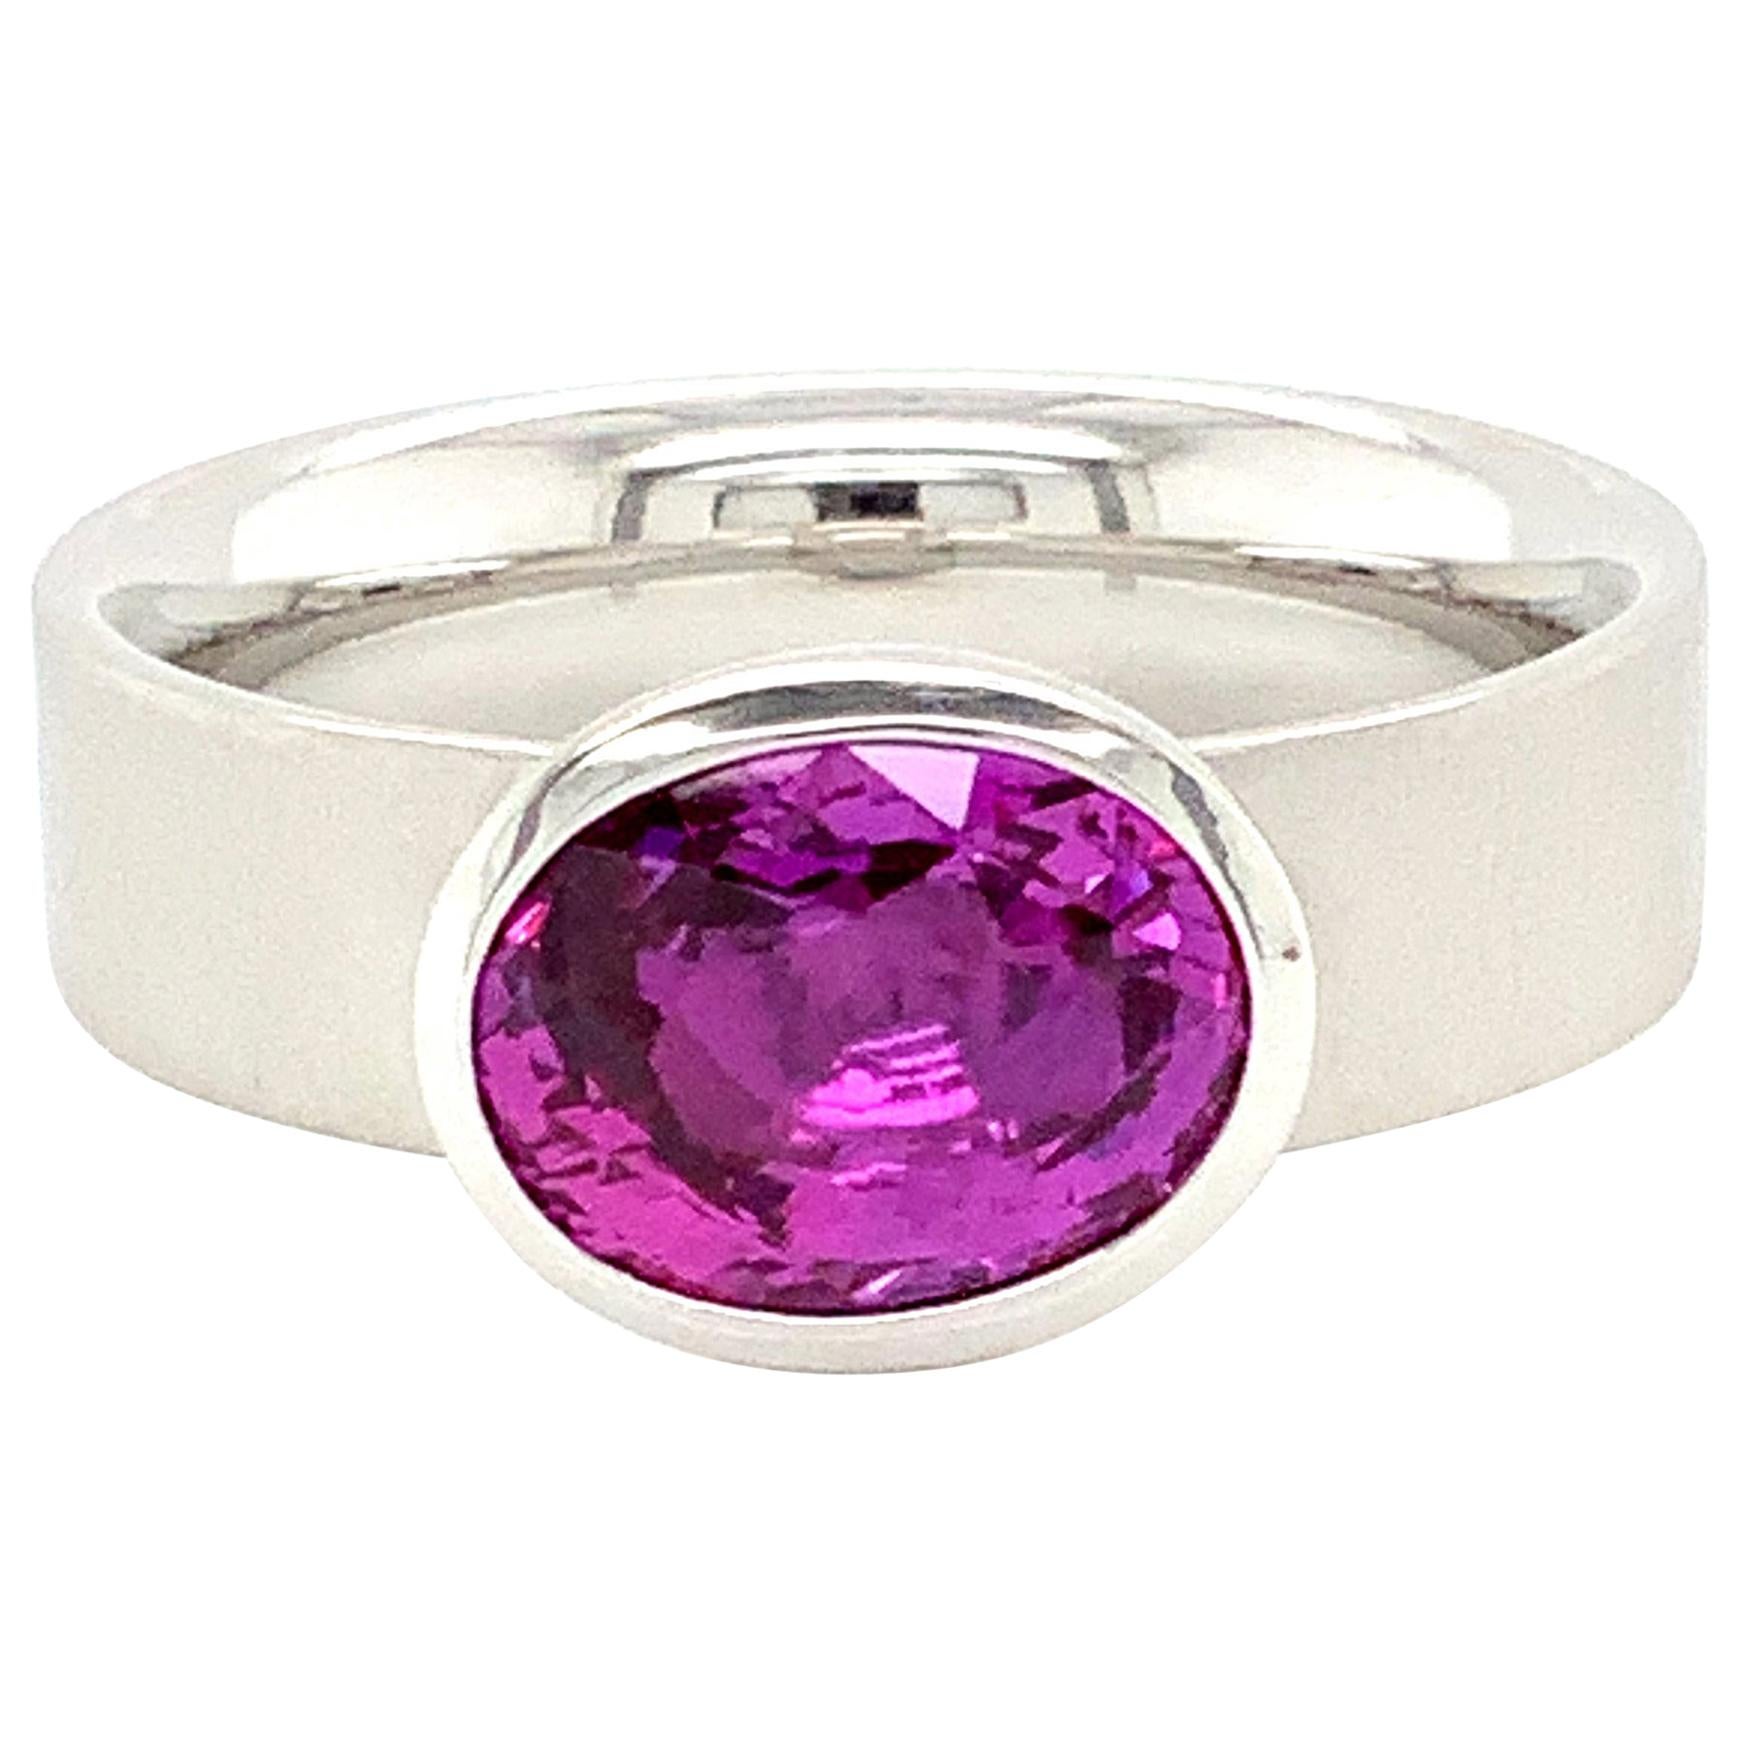 Georg Spreng - Solo Ring Platinum 950 with Oval Natural Pink Sapphire Ceylon For Sale